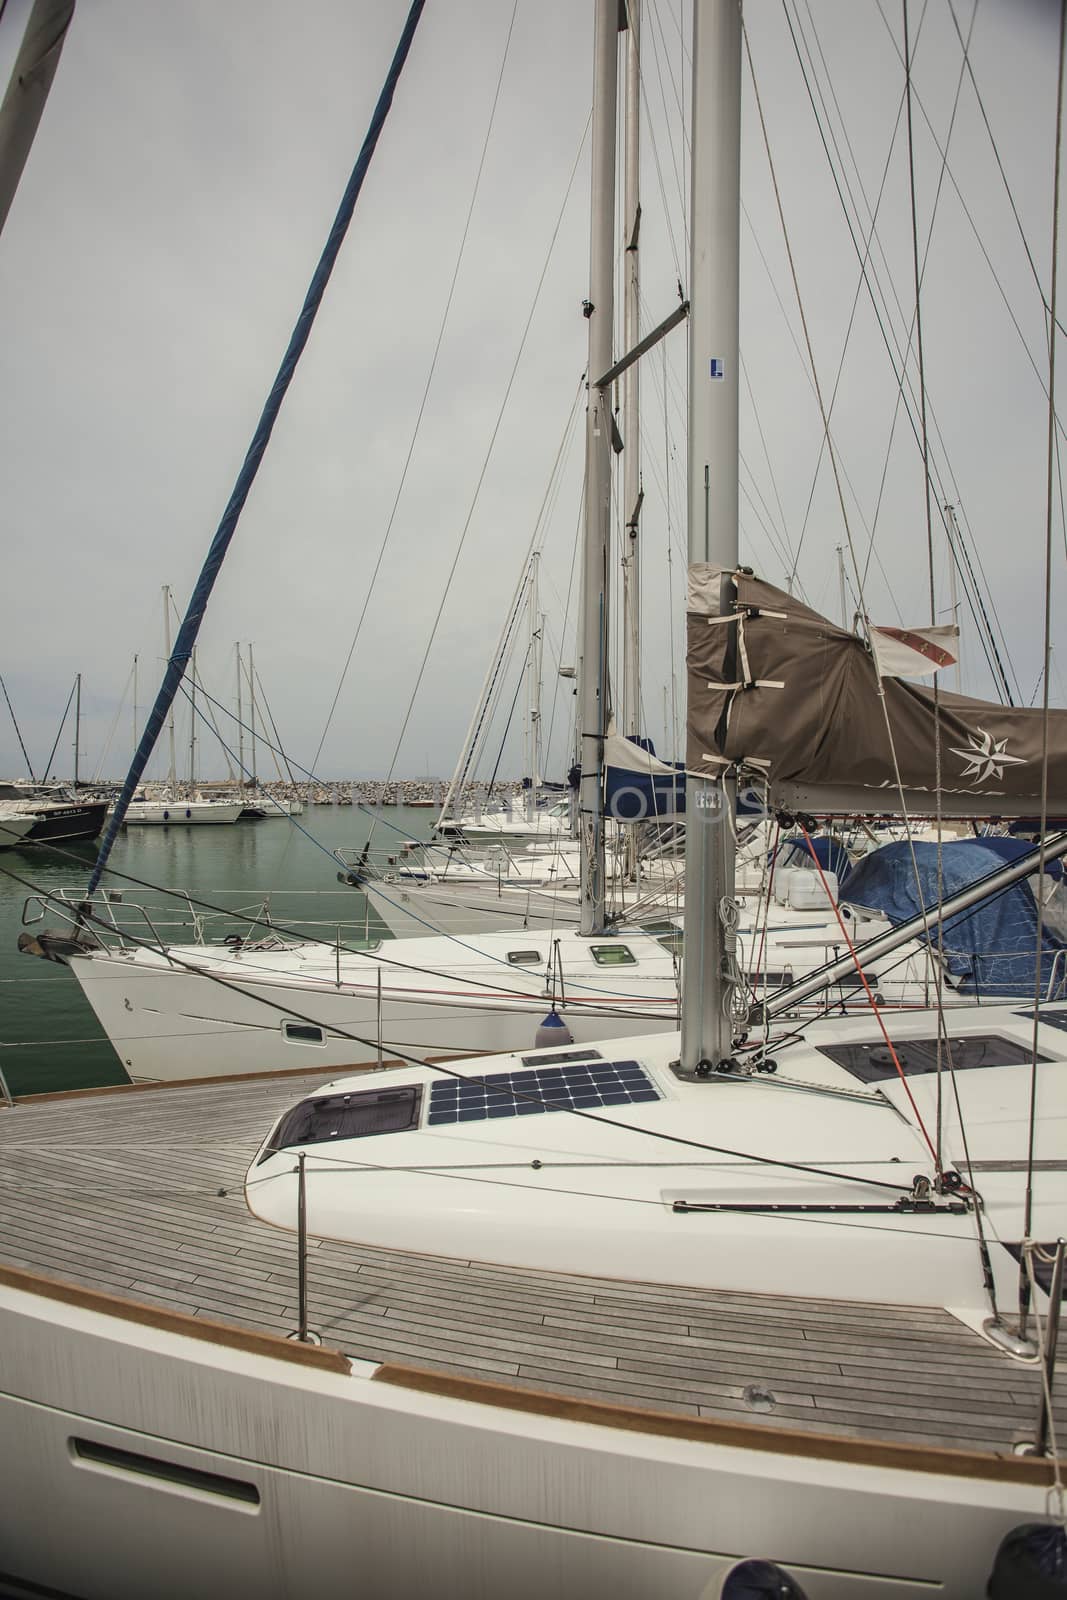 Luxury boats moored in the Port  by pippocarlot